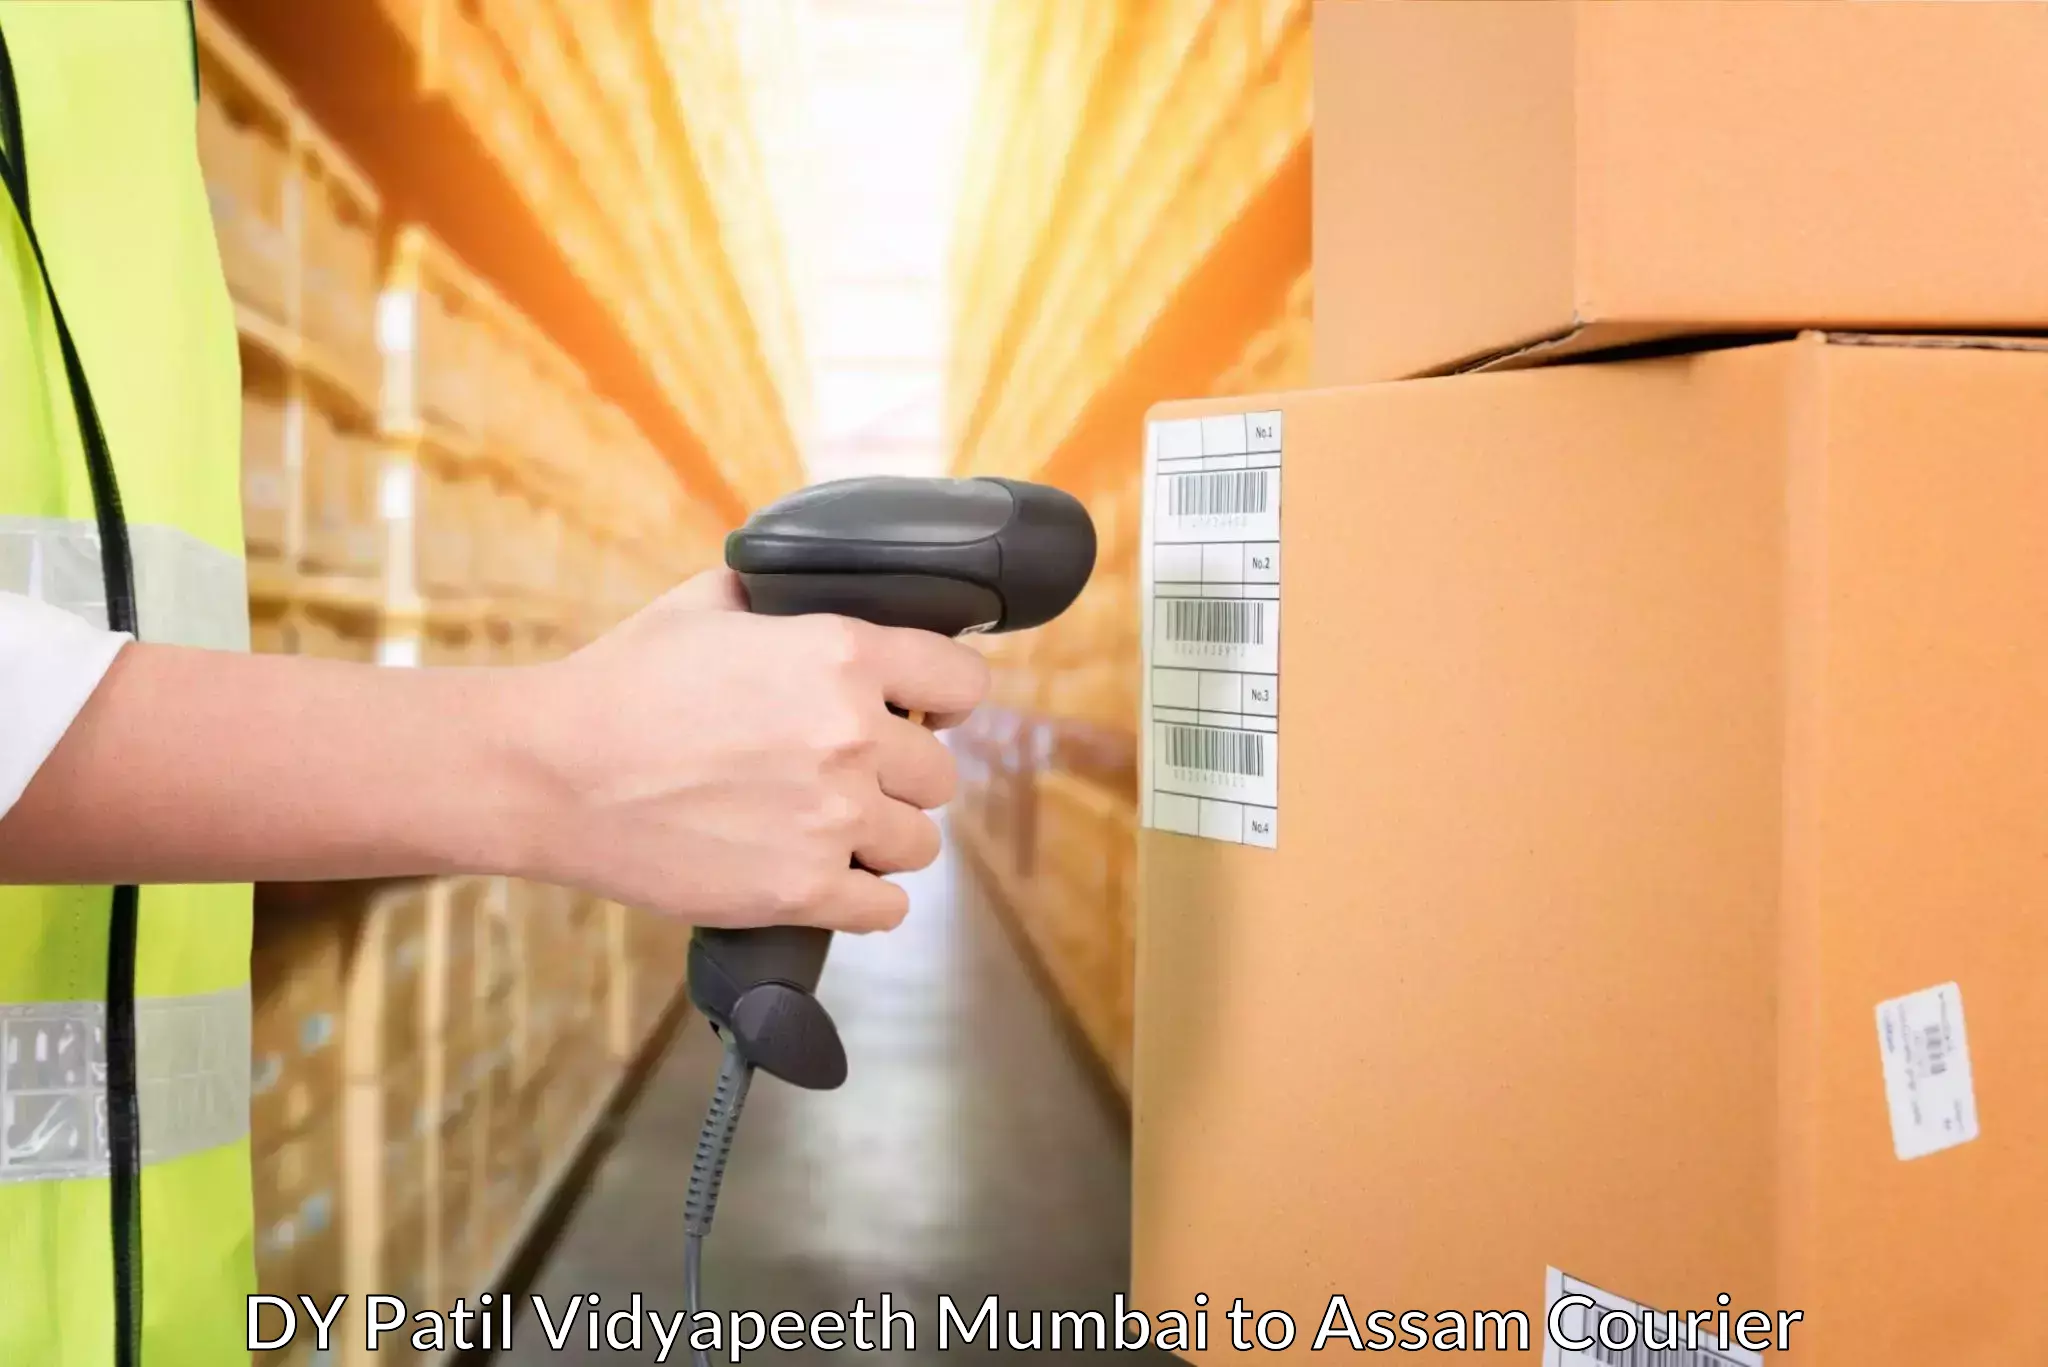 Global parcel delivery DY Patil Vidyapeeth Mumbai to Lakhipur